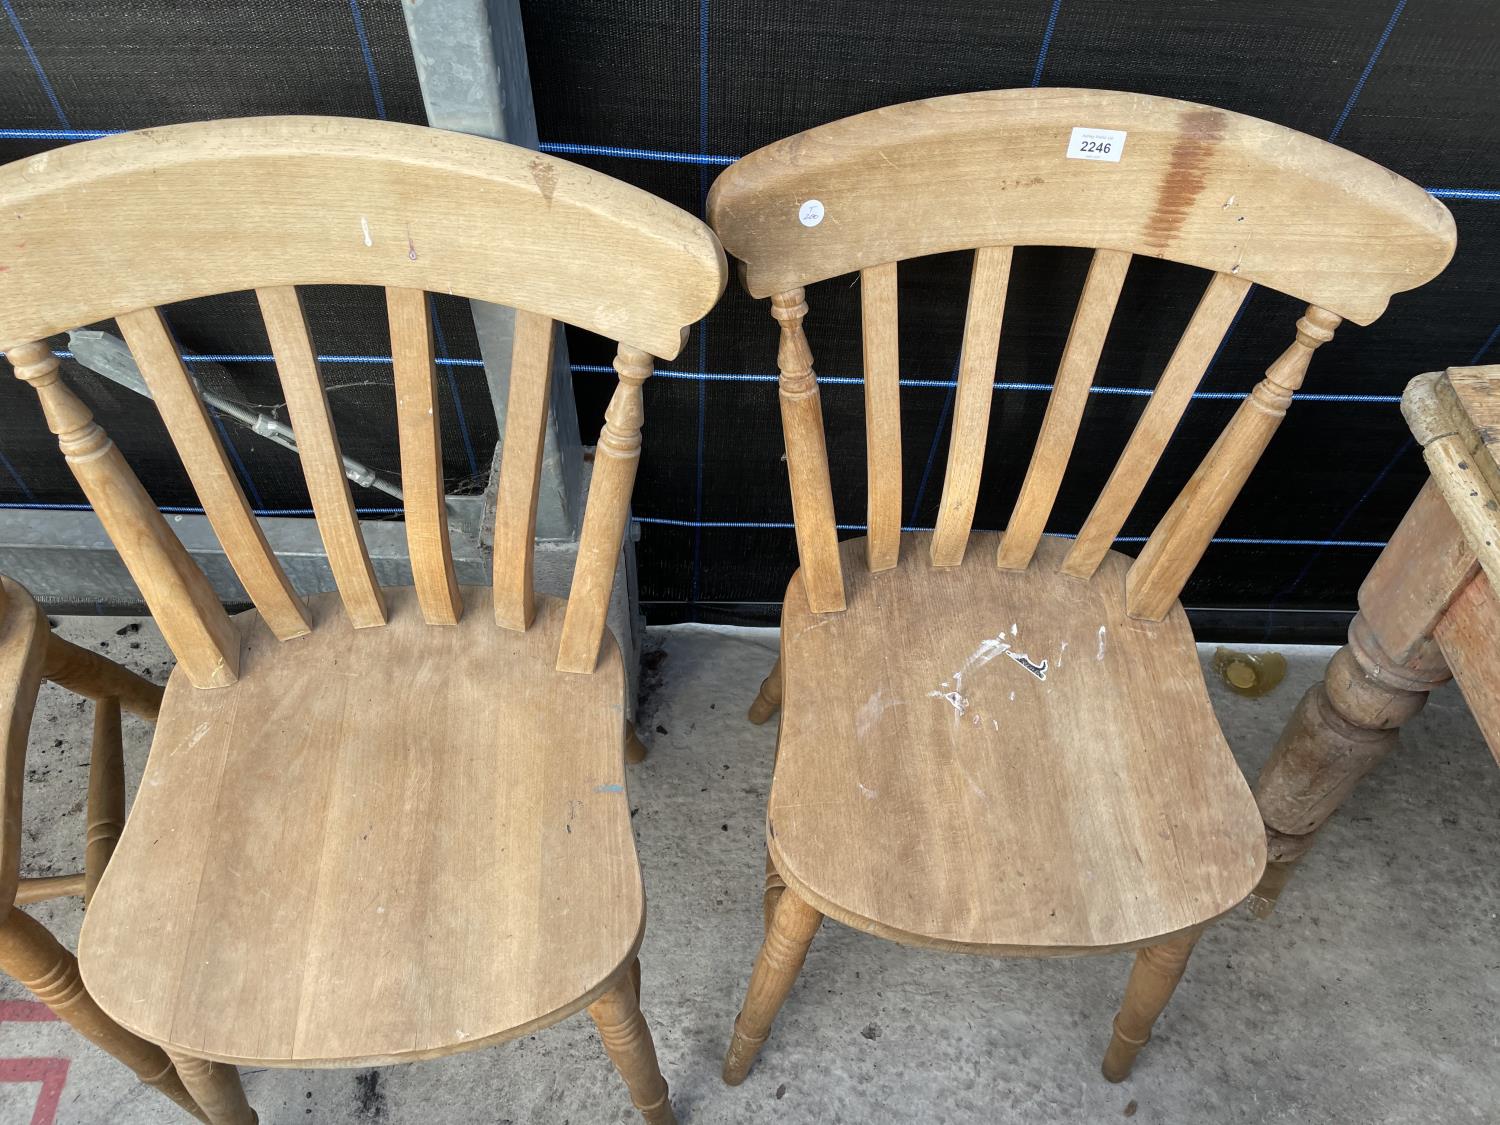 THREE VICTORIAN STYLE KITCHEN CHAIRS - Image 2 of 4